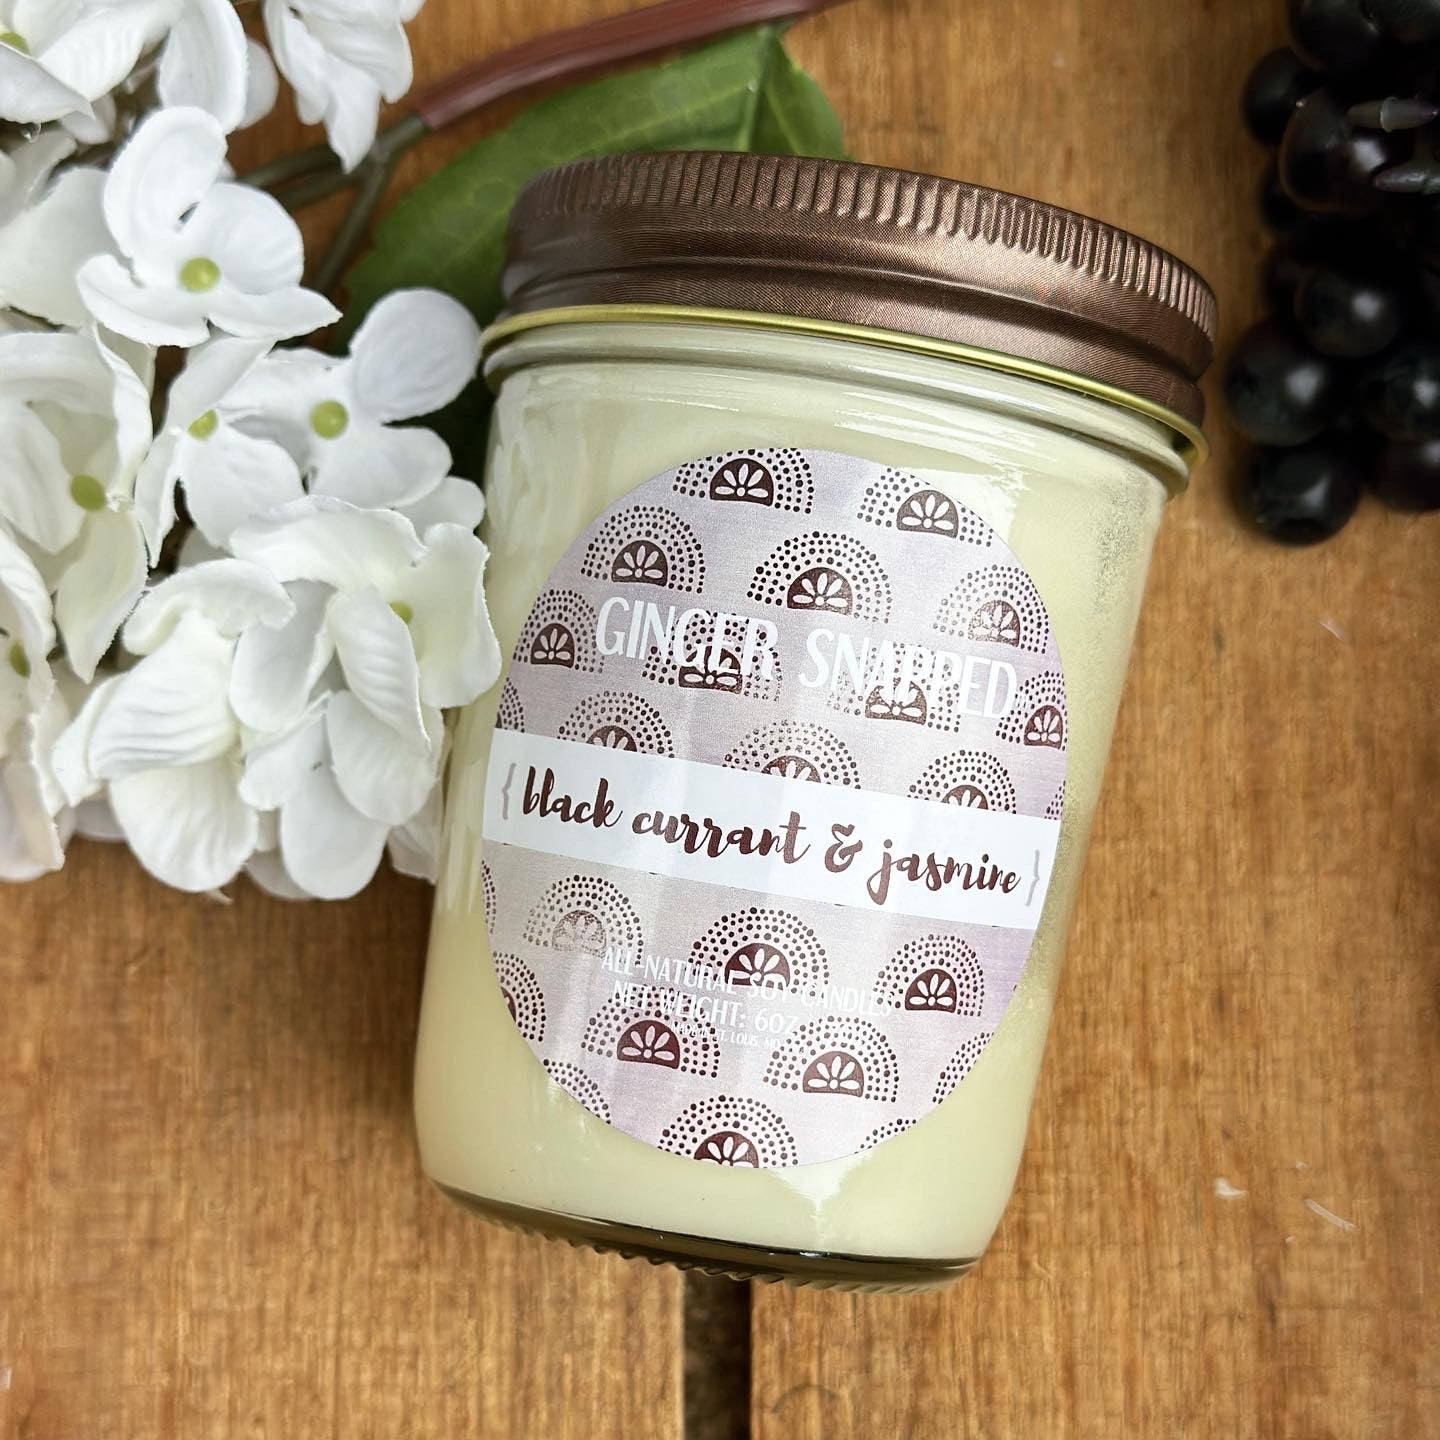 STUDIO CLEARANCE SALE  Seasonal Stickers – Ginger Snapped Candles